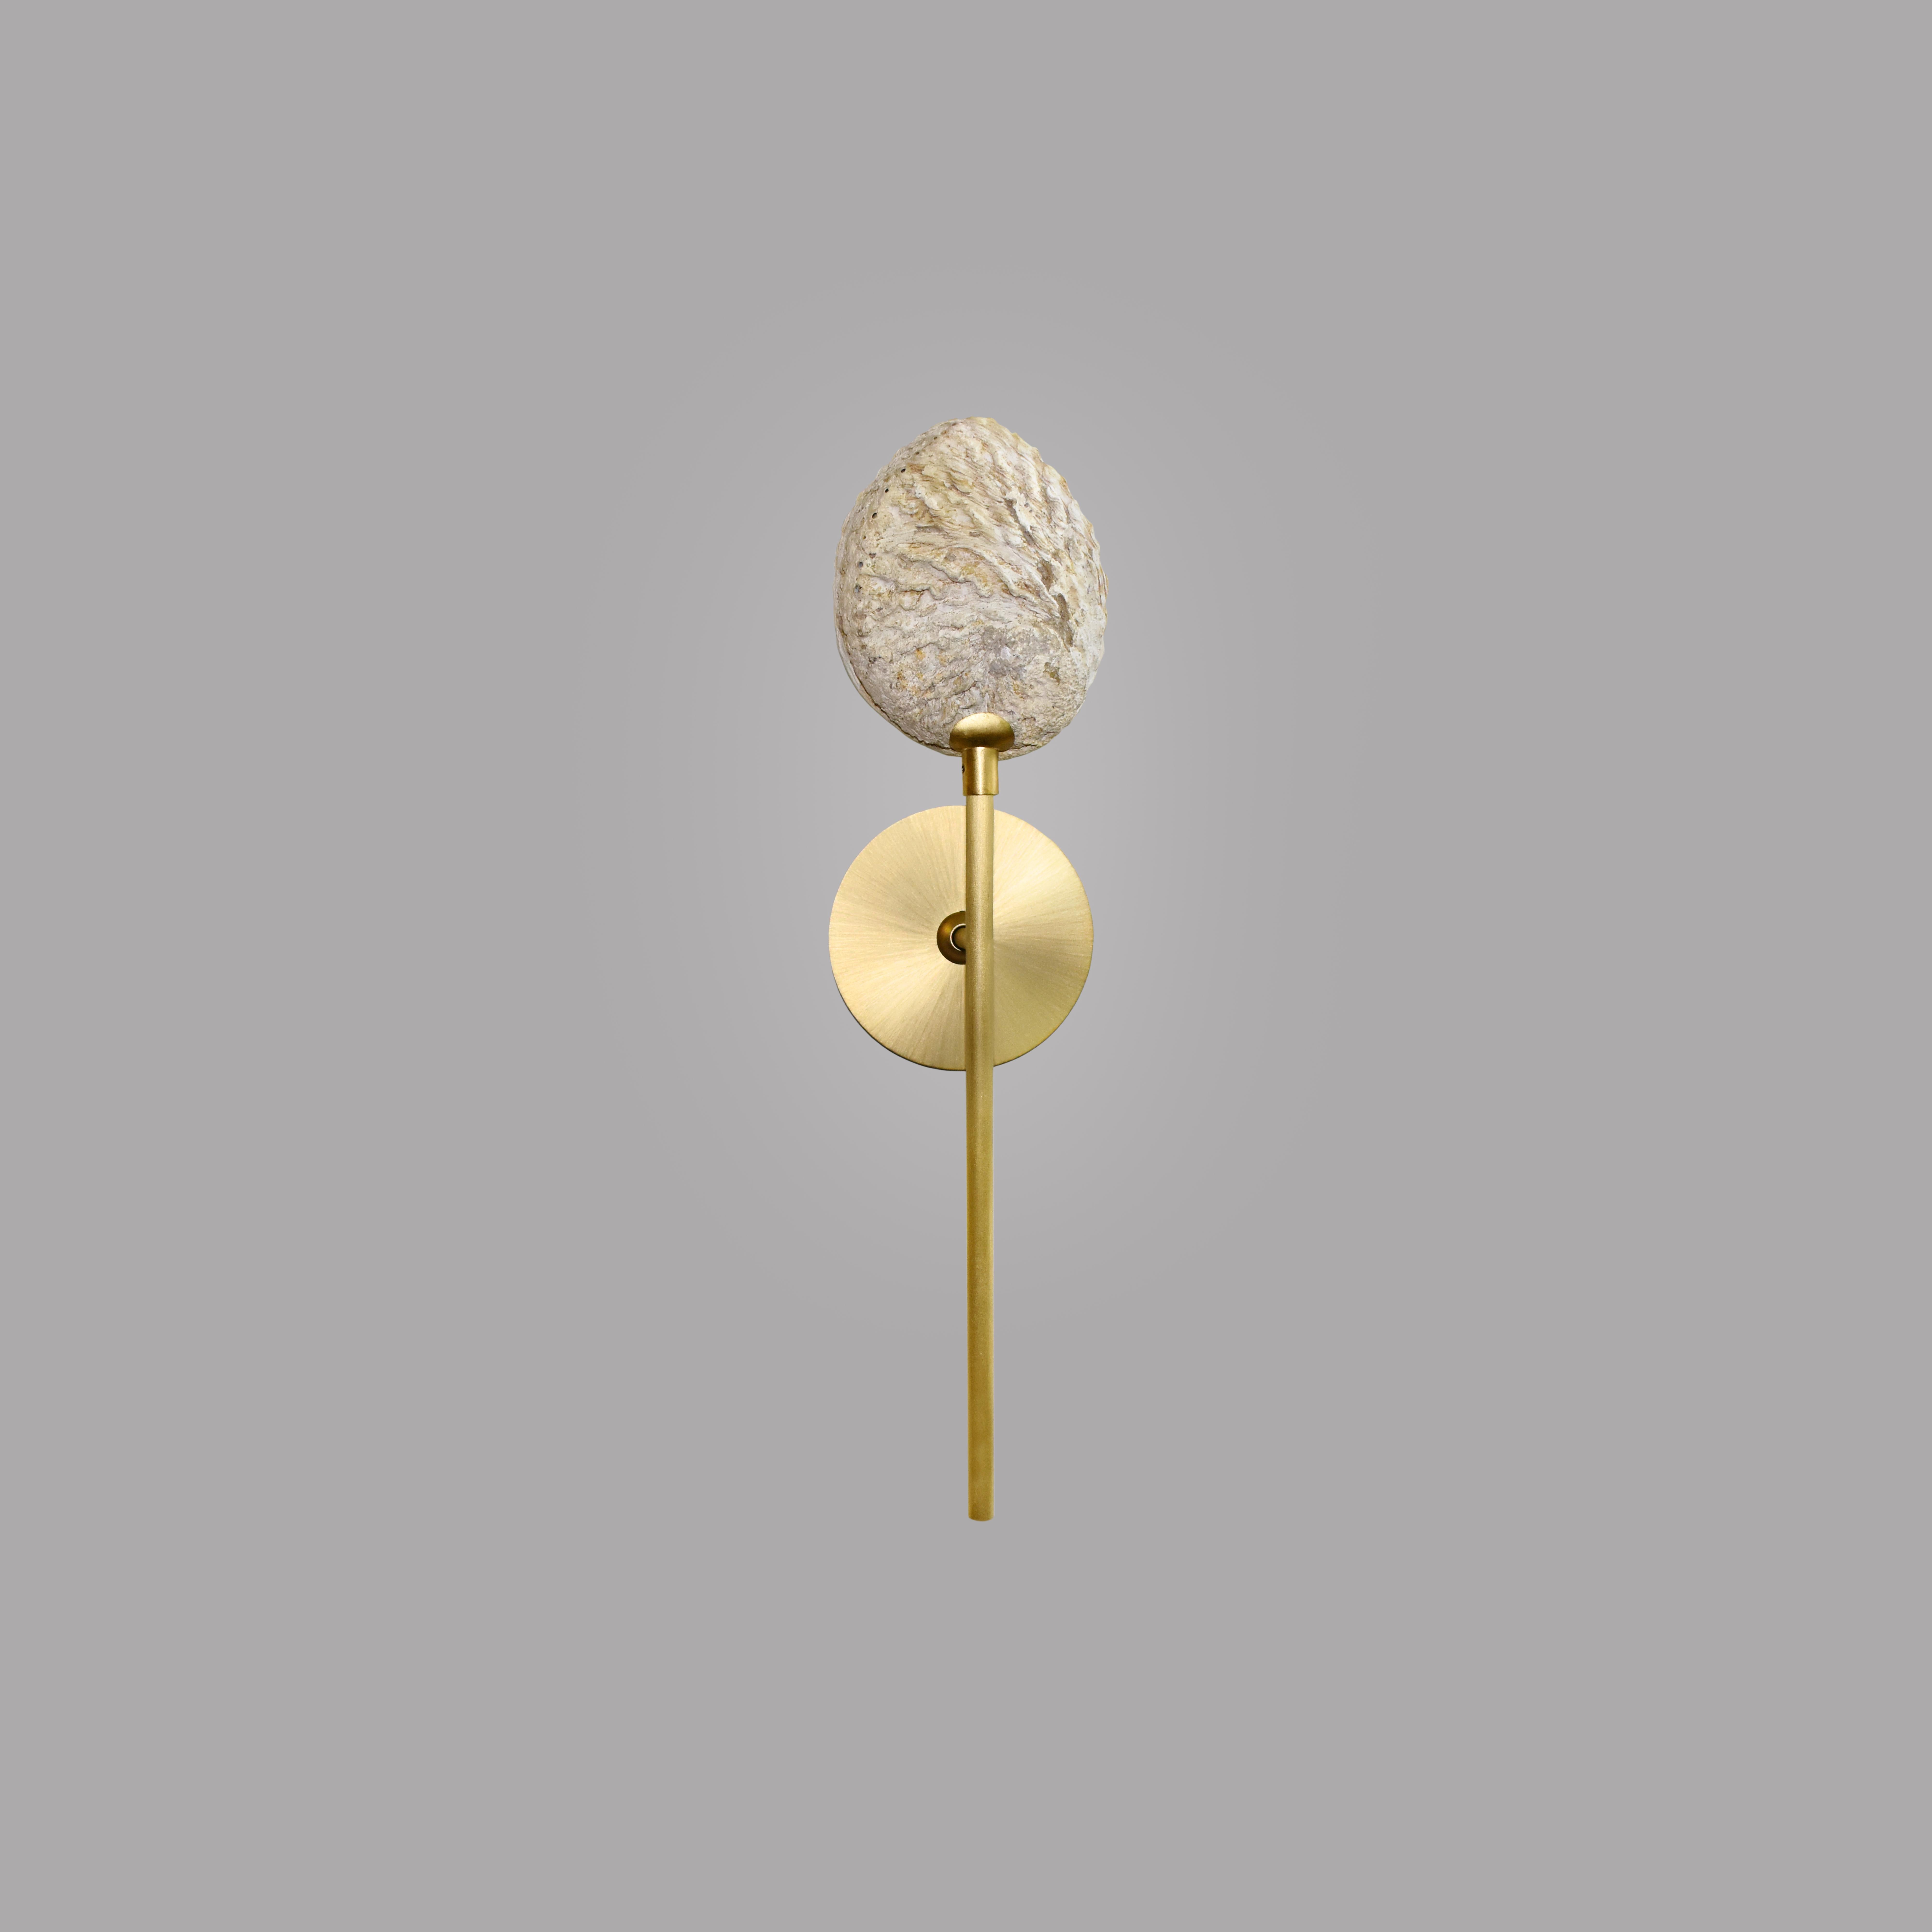 Coquillage raw wall light I by Ludovic Clément d’Armont
Dimensions: D 12 x W 14 x H 47 cm
Materials: Shell, brass.

Ludovic Clément d’Armont is in the continuation of a family tradition of centuries of gentle glassmakers, painters, carpenters